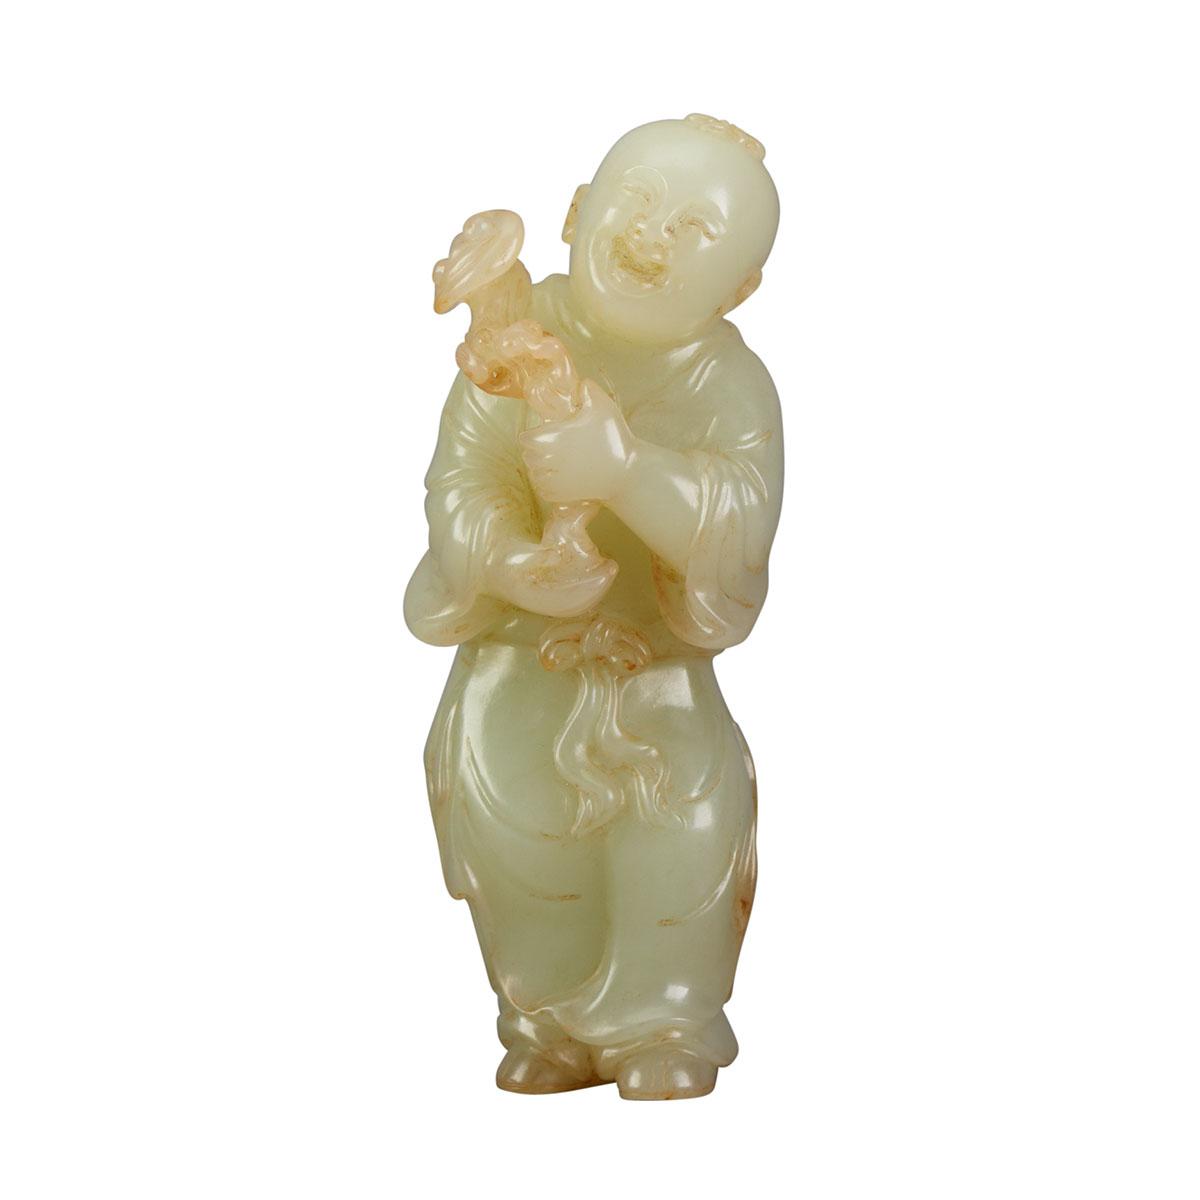 Well-Carved Pale Celadon Jade Boy, 18th Century